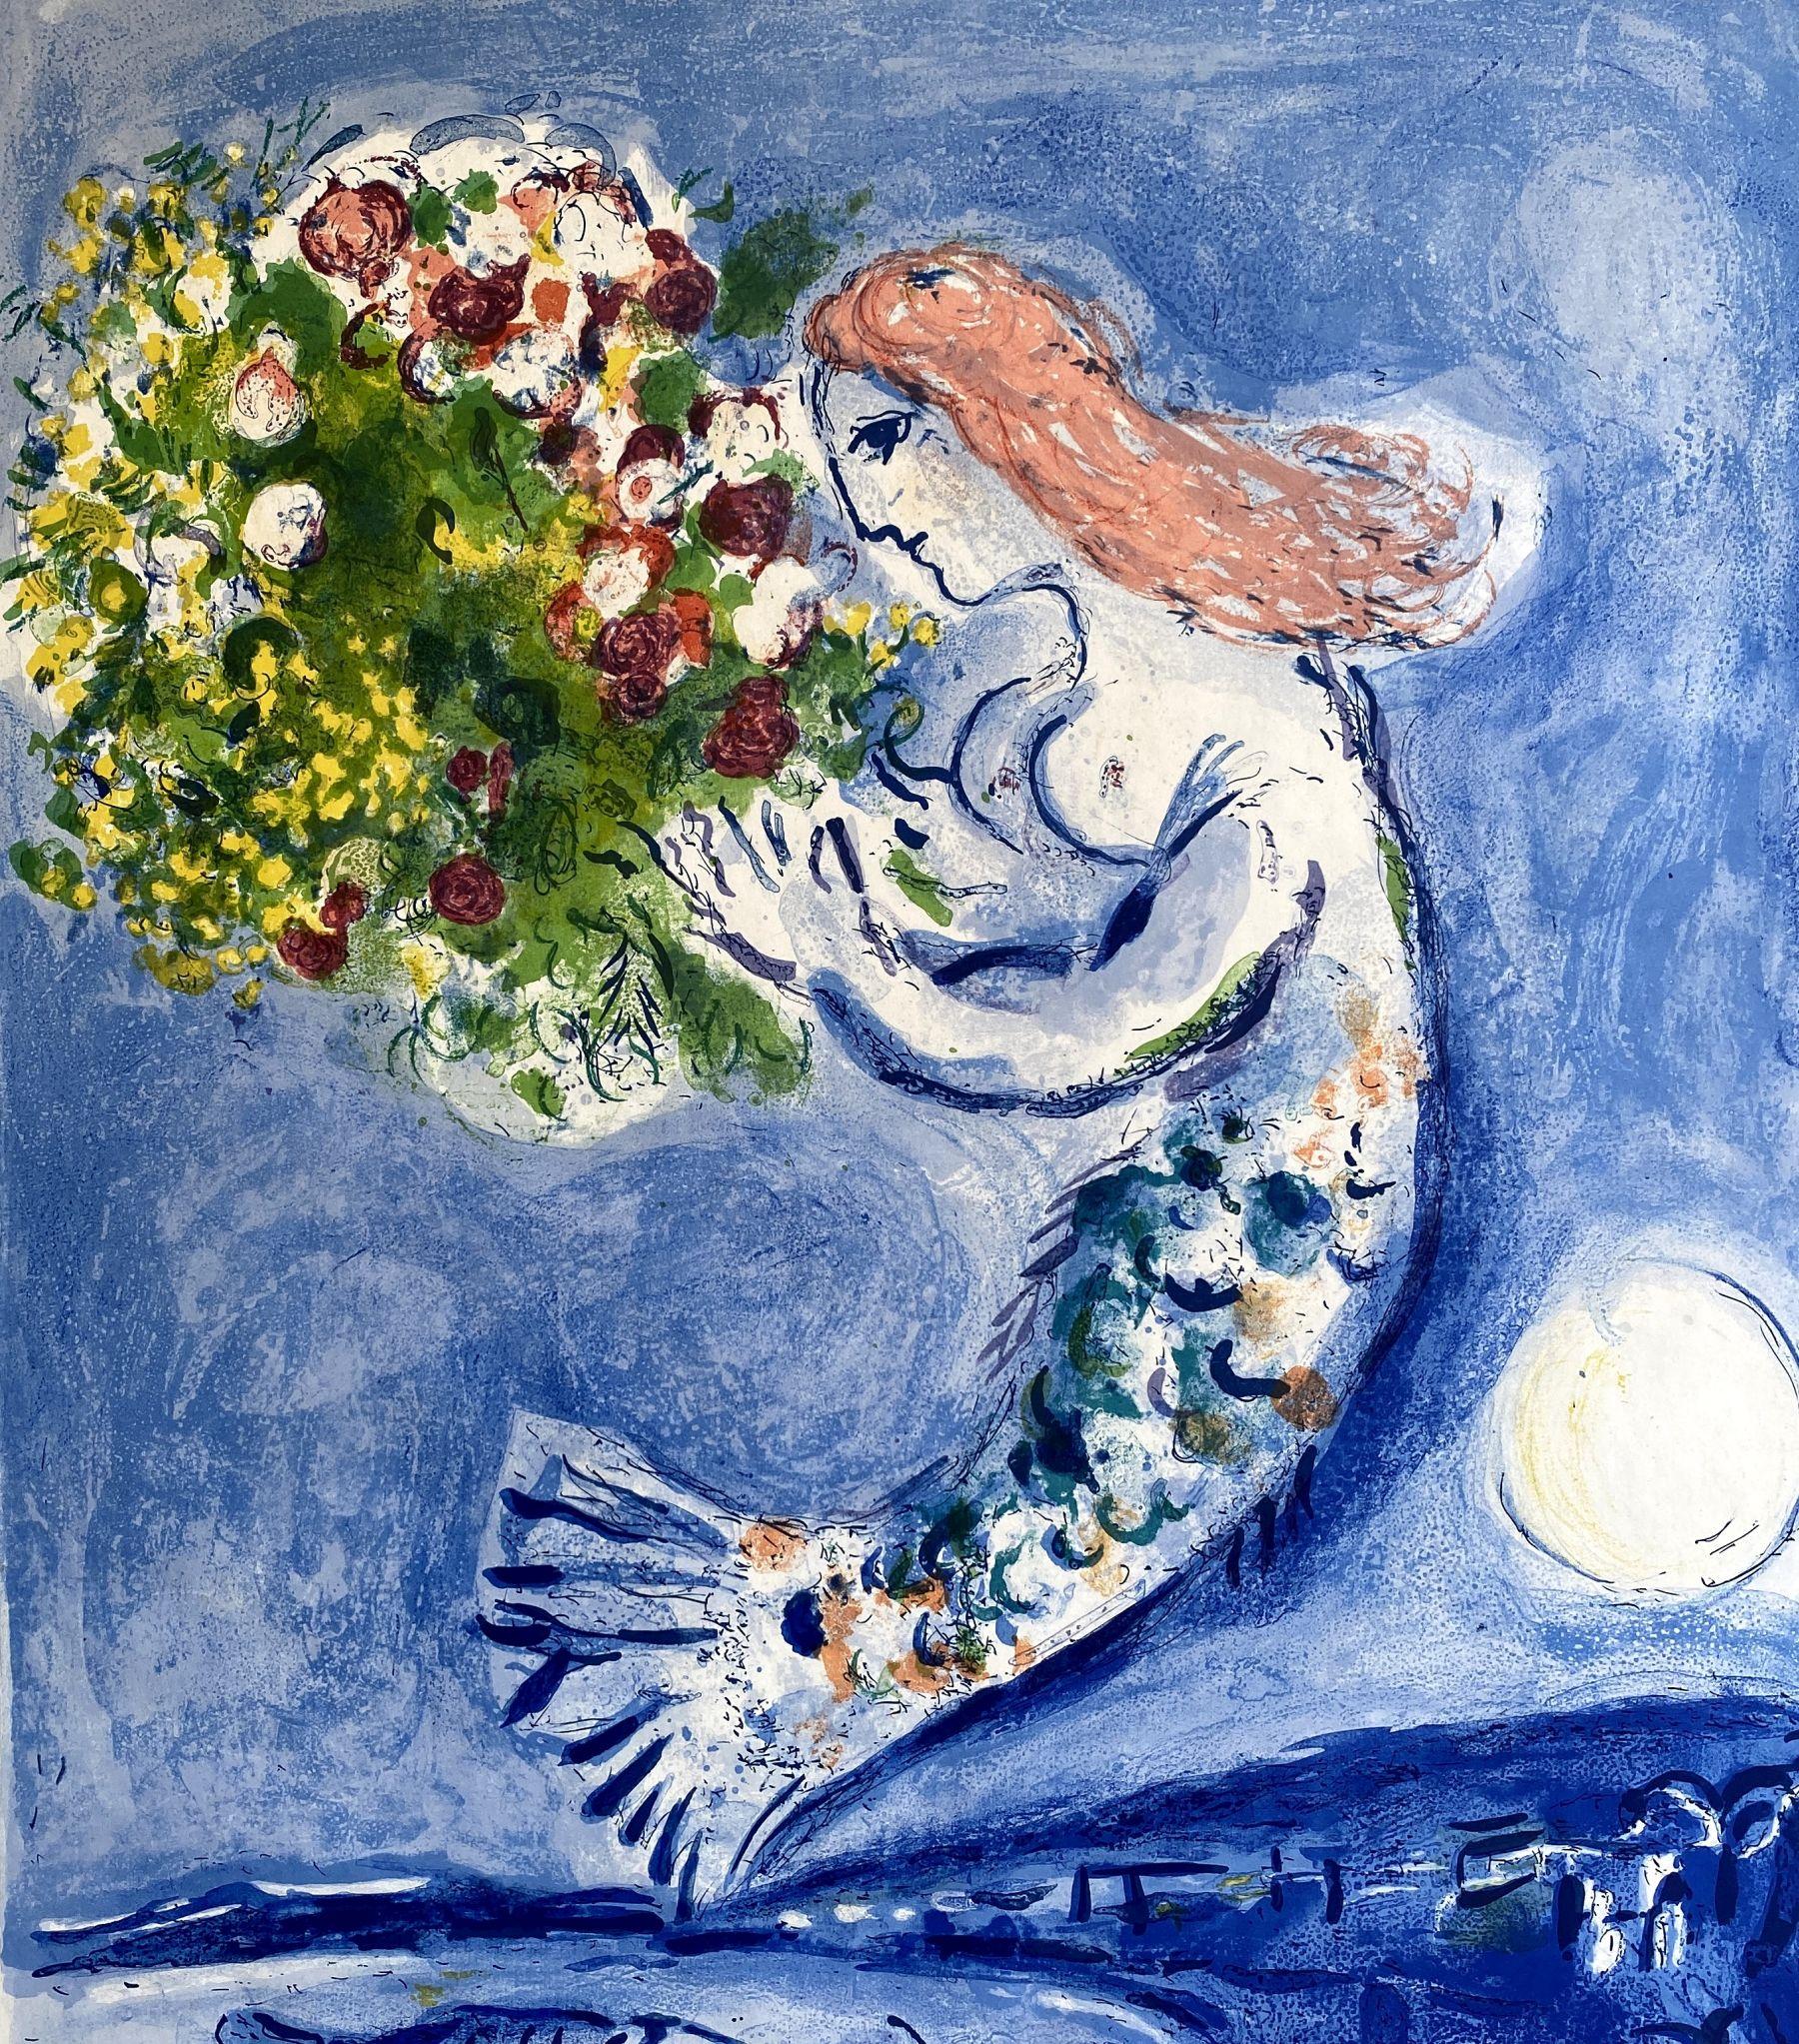 Marc Chagall
Nice & French Riviera : Bay of Angels, 1961
